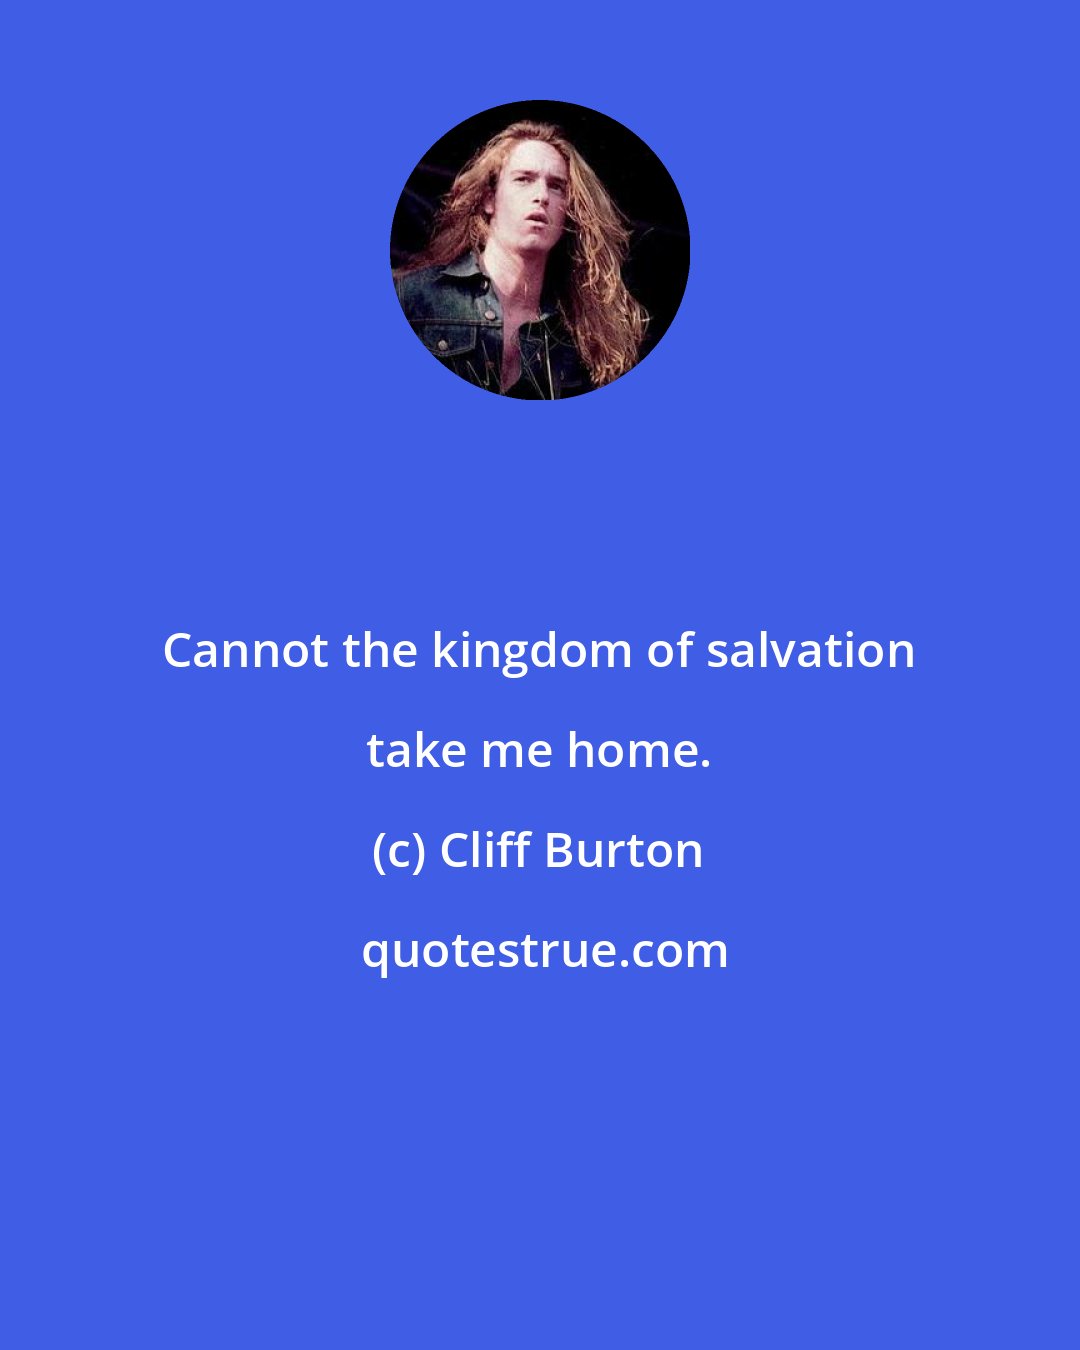 Cliff Burton: Cannot the kingdom of salvation take me home.